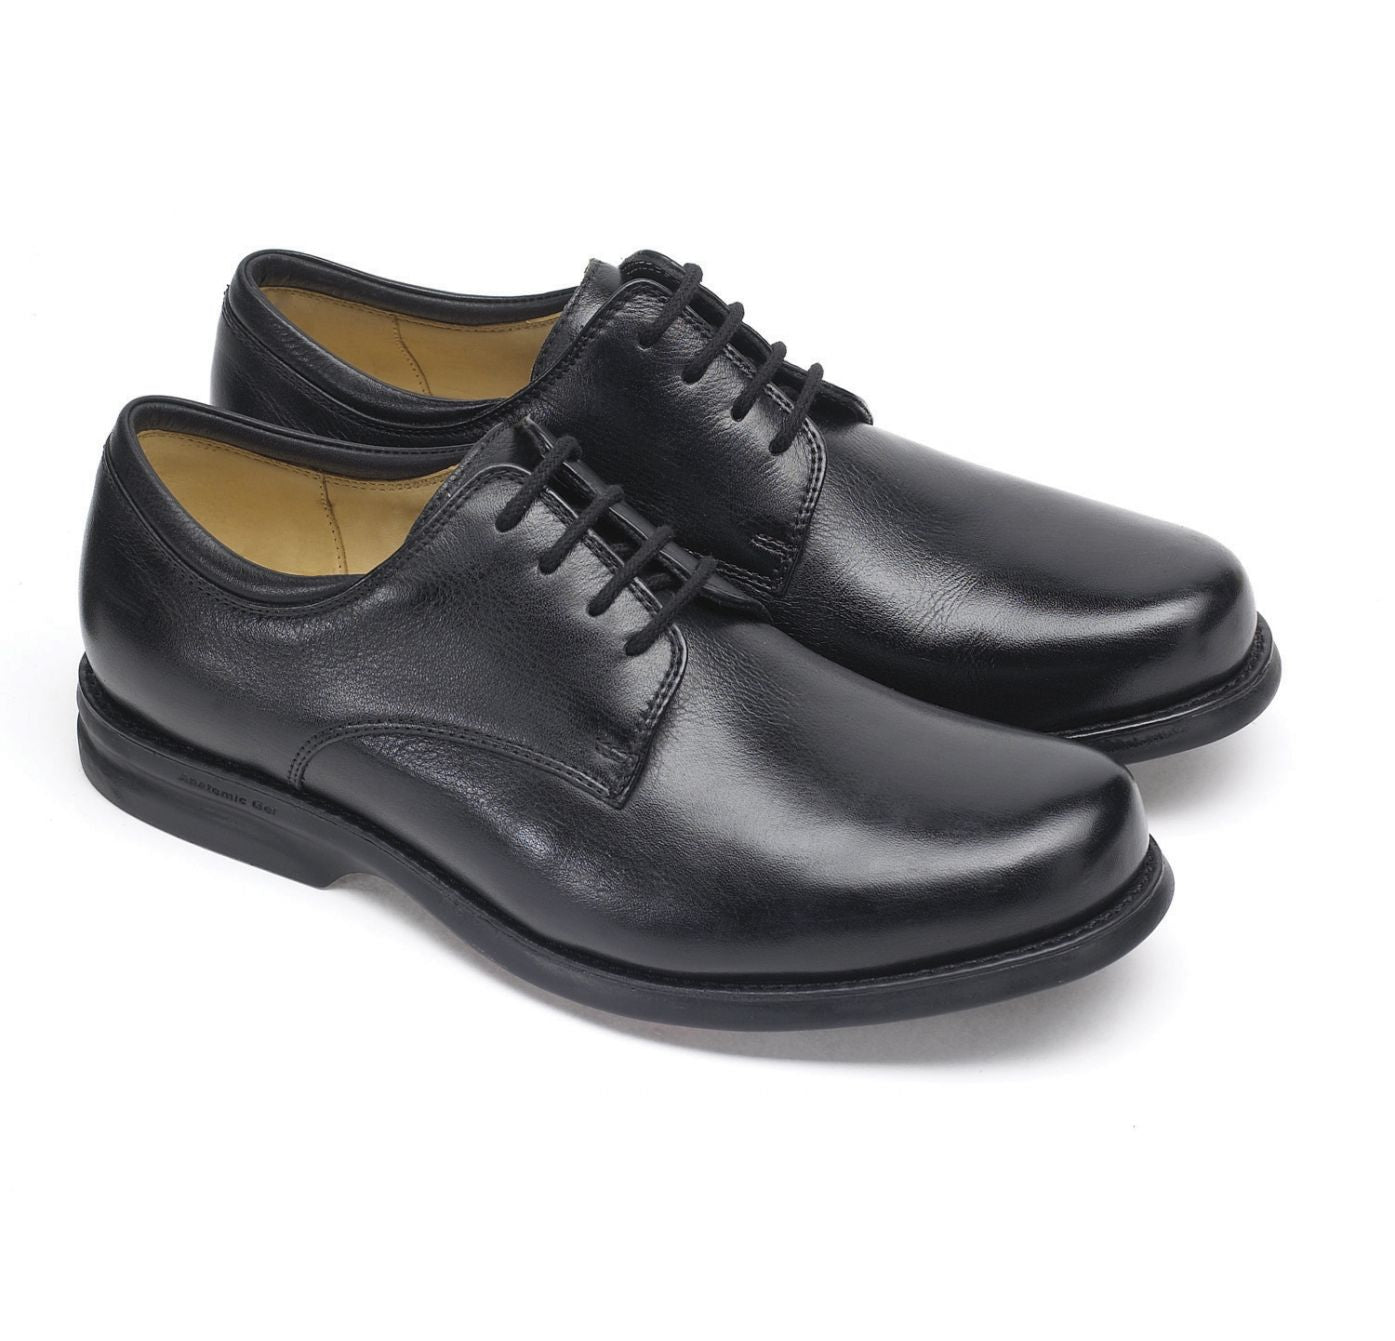 Anatomic Niteroi Mens Black Leather Lace Up Shoes - elevate your sole